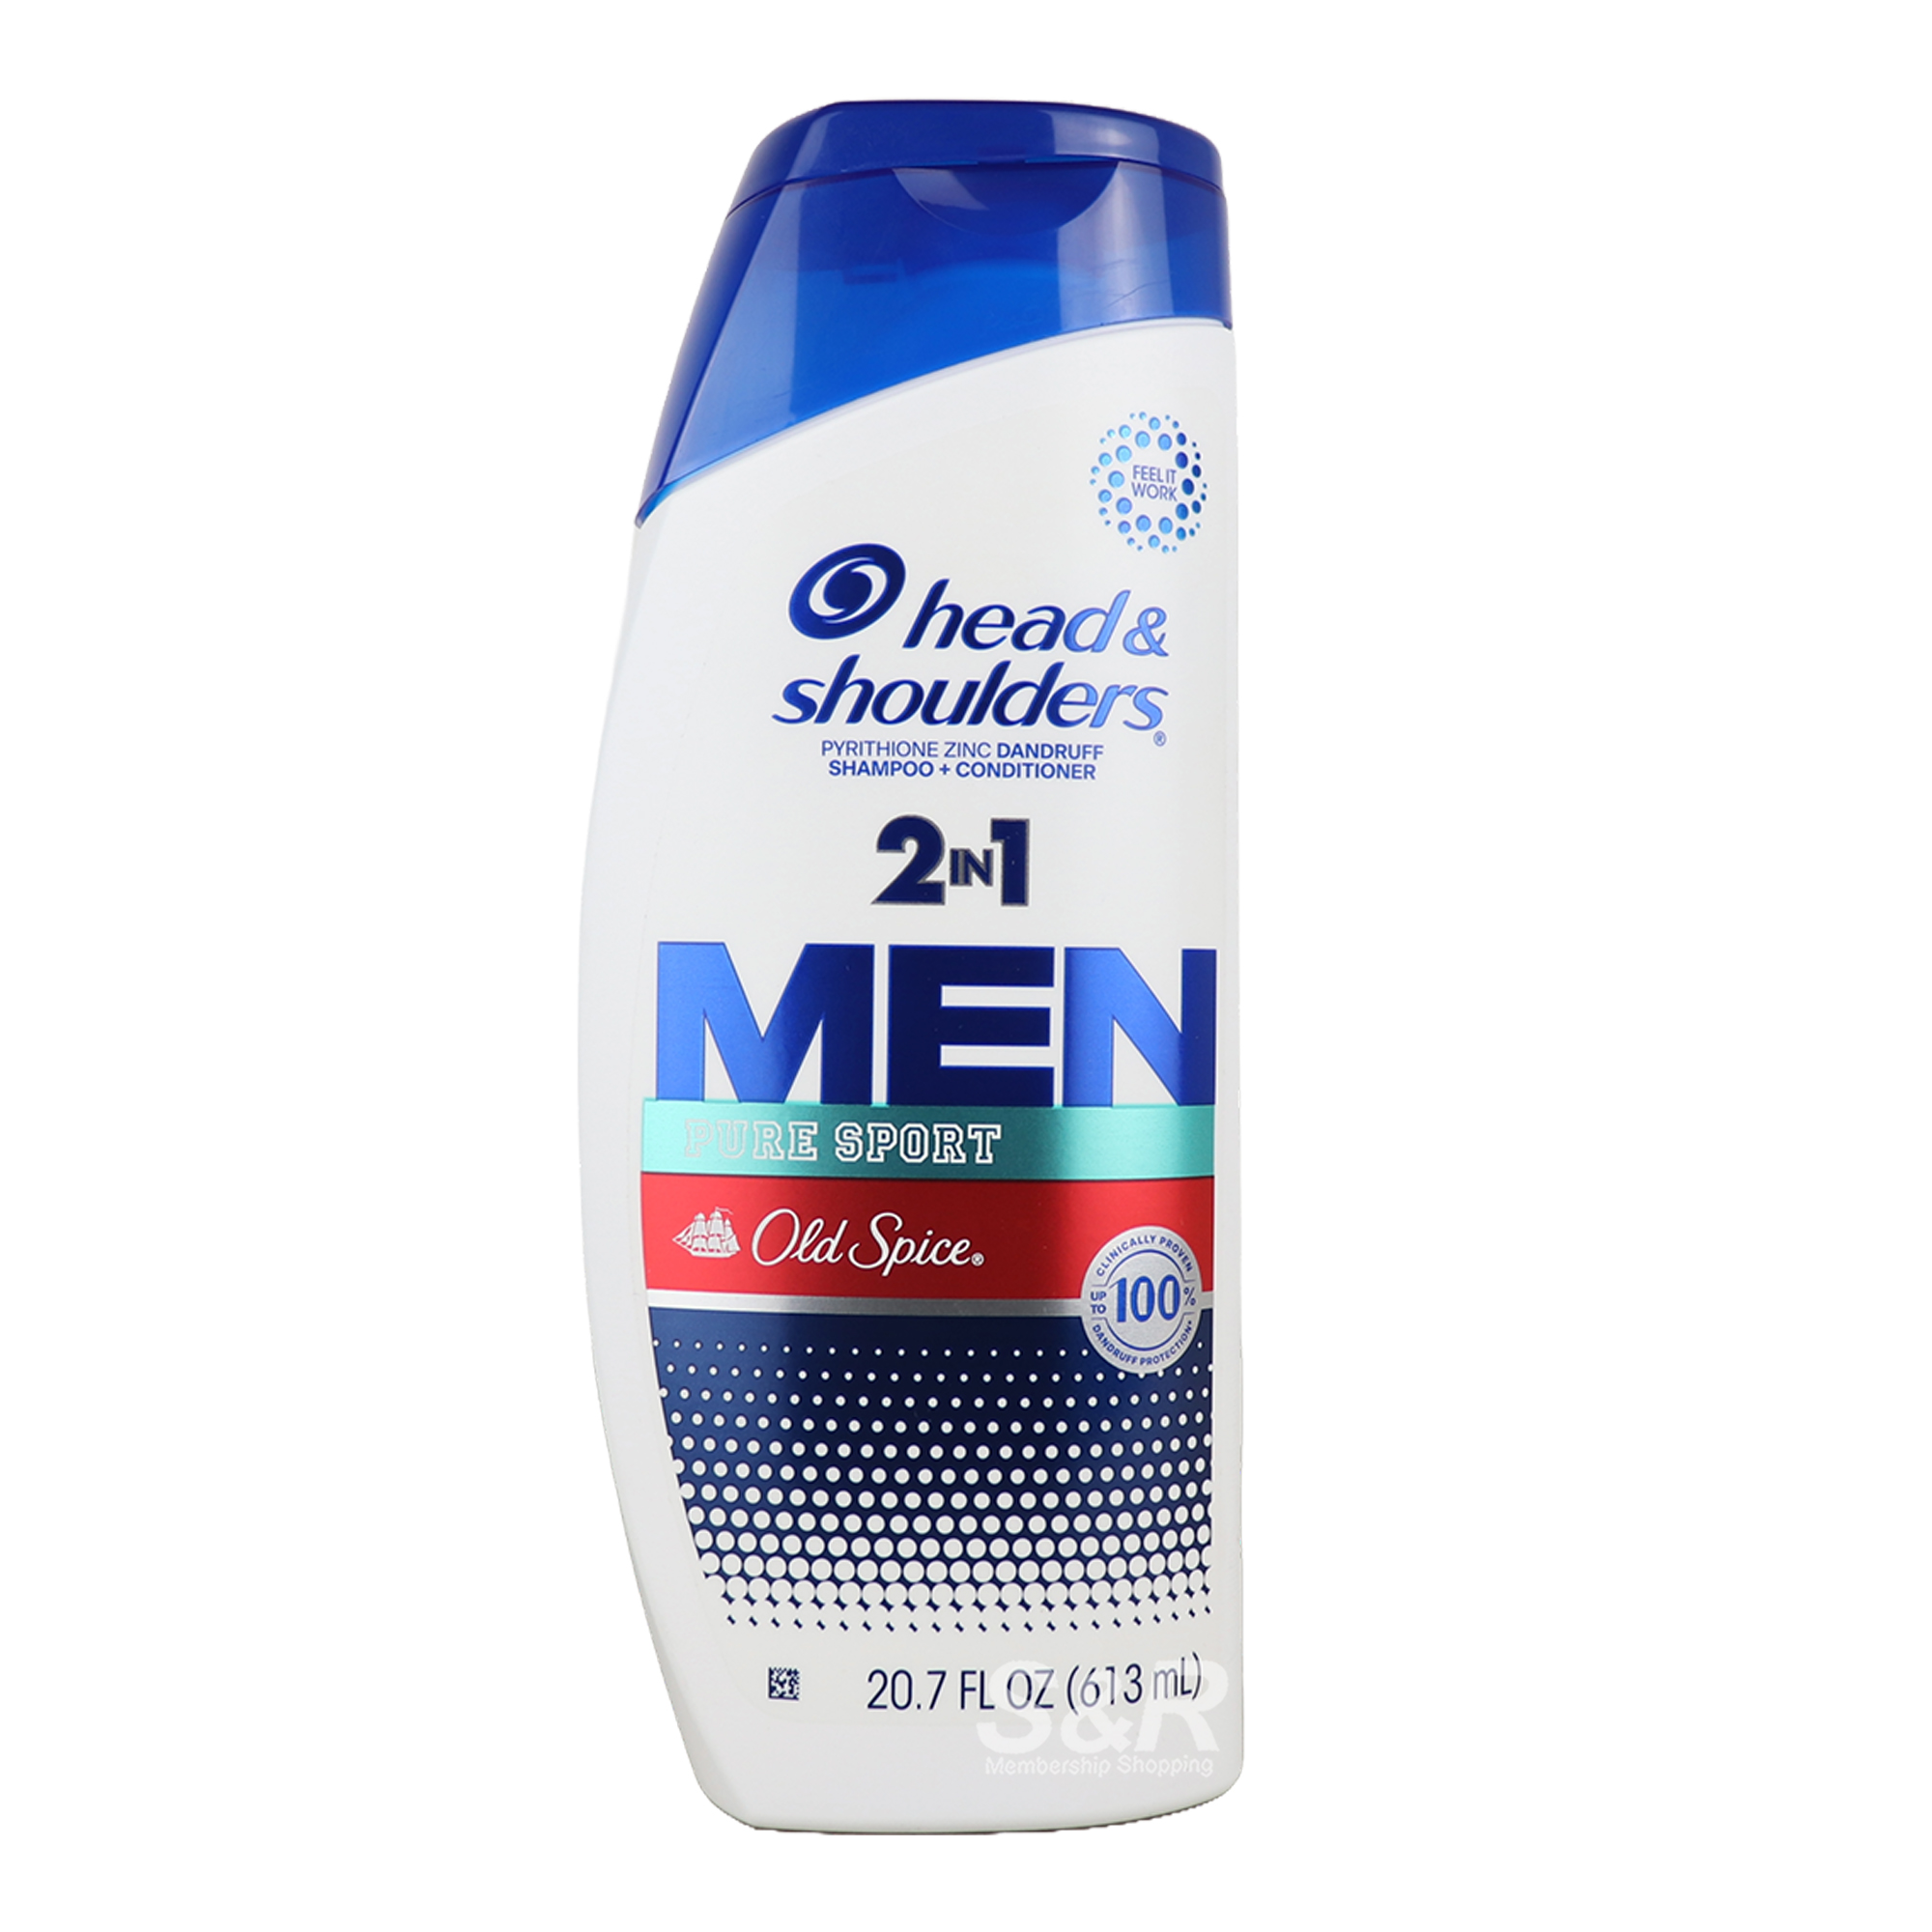 Head & Shoulders Men Advanced Series Old Spice Pure Sport 2 in 1 Shampoo and Conditioner 613mL